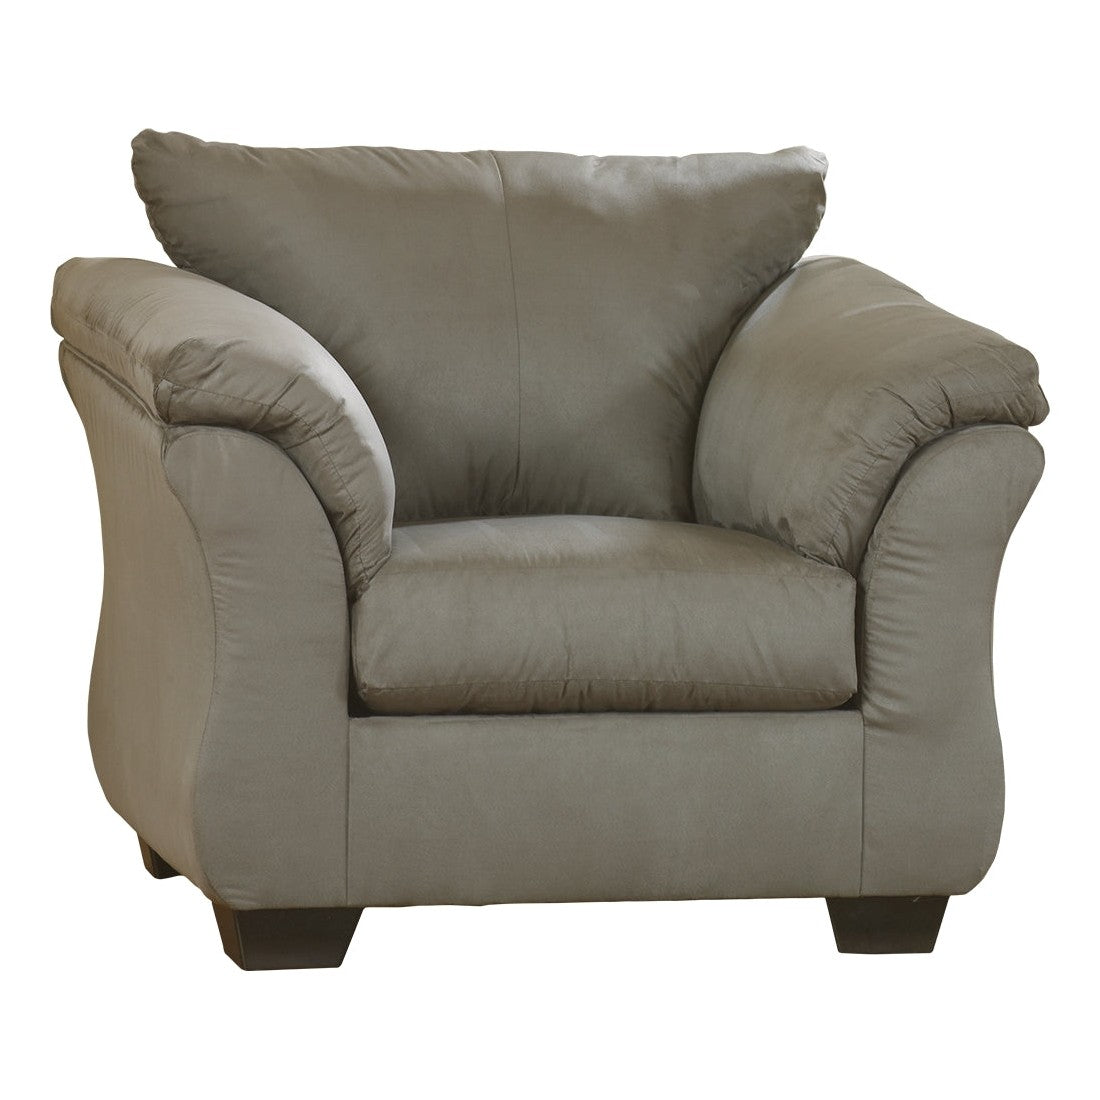 Darcy Chair Ash-7500520